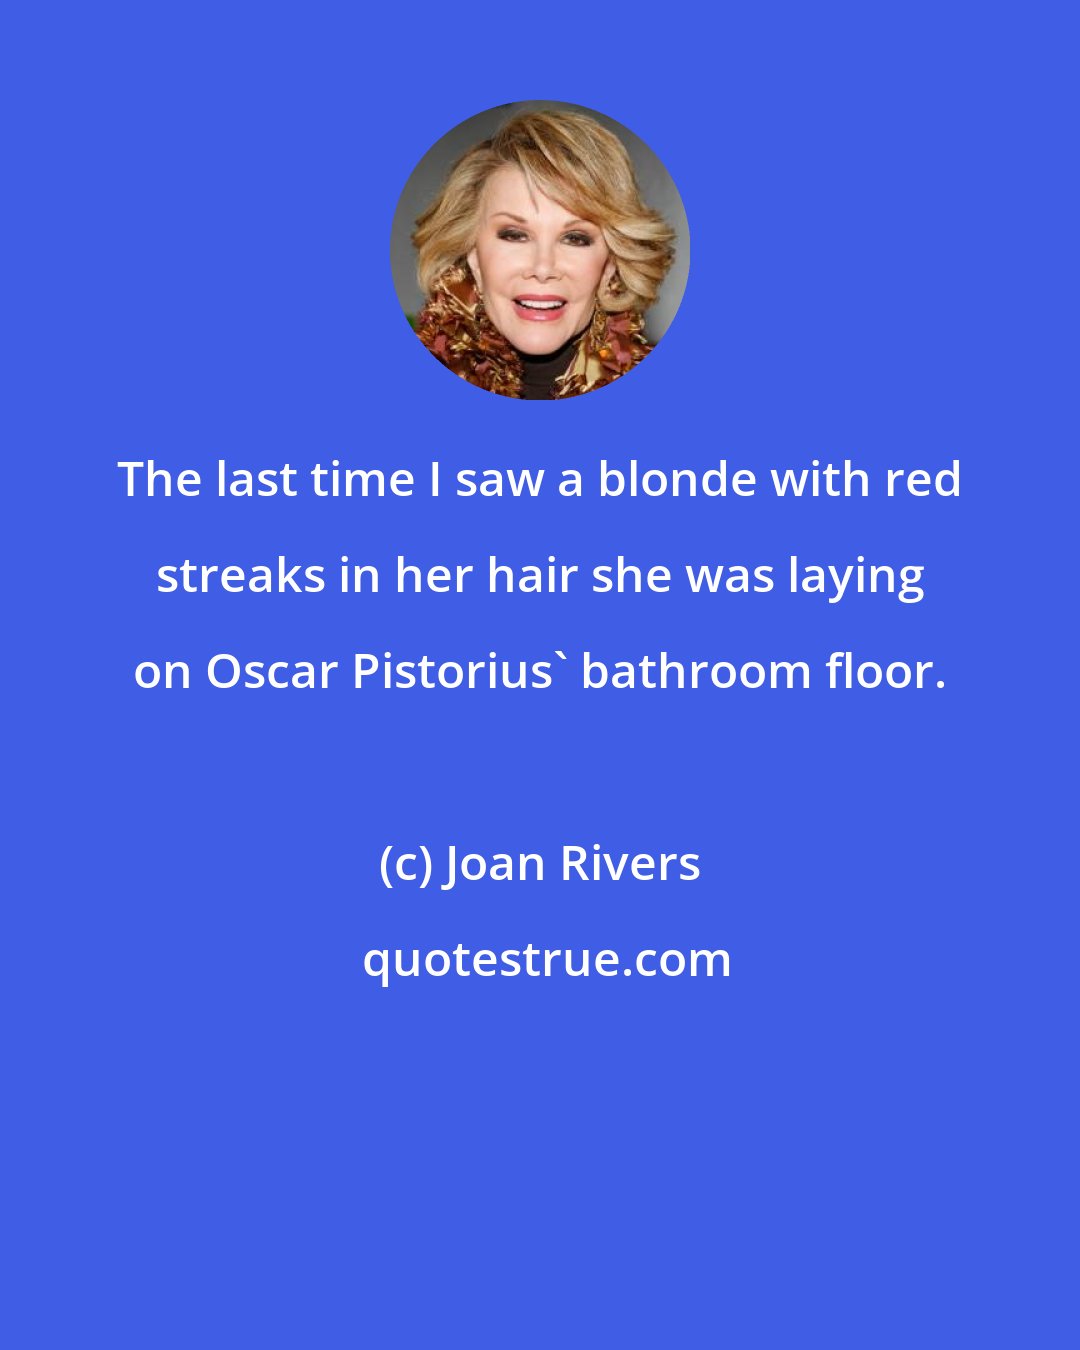 Joan Rivers: The last time I saw a blonde with red streaks in her hair she was laying on Oscar Pistorius' bathroom floor.